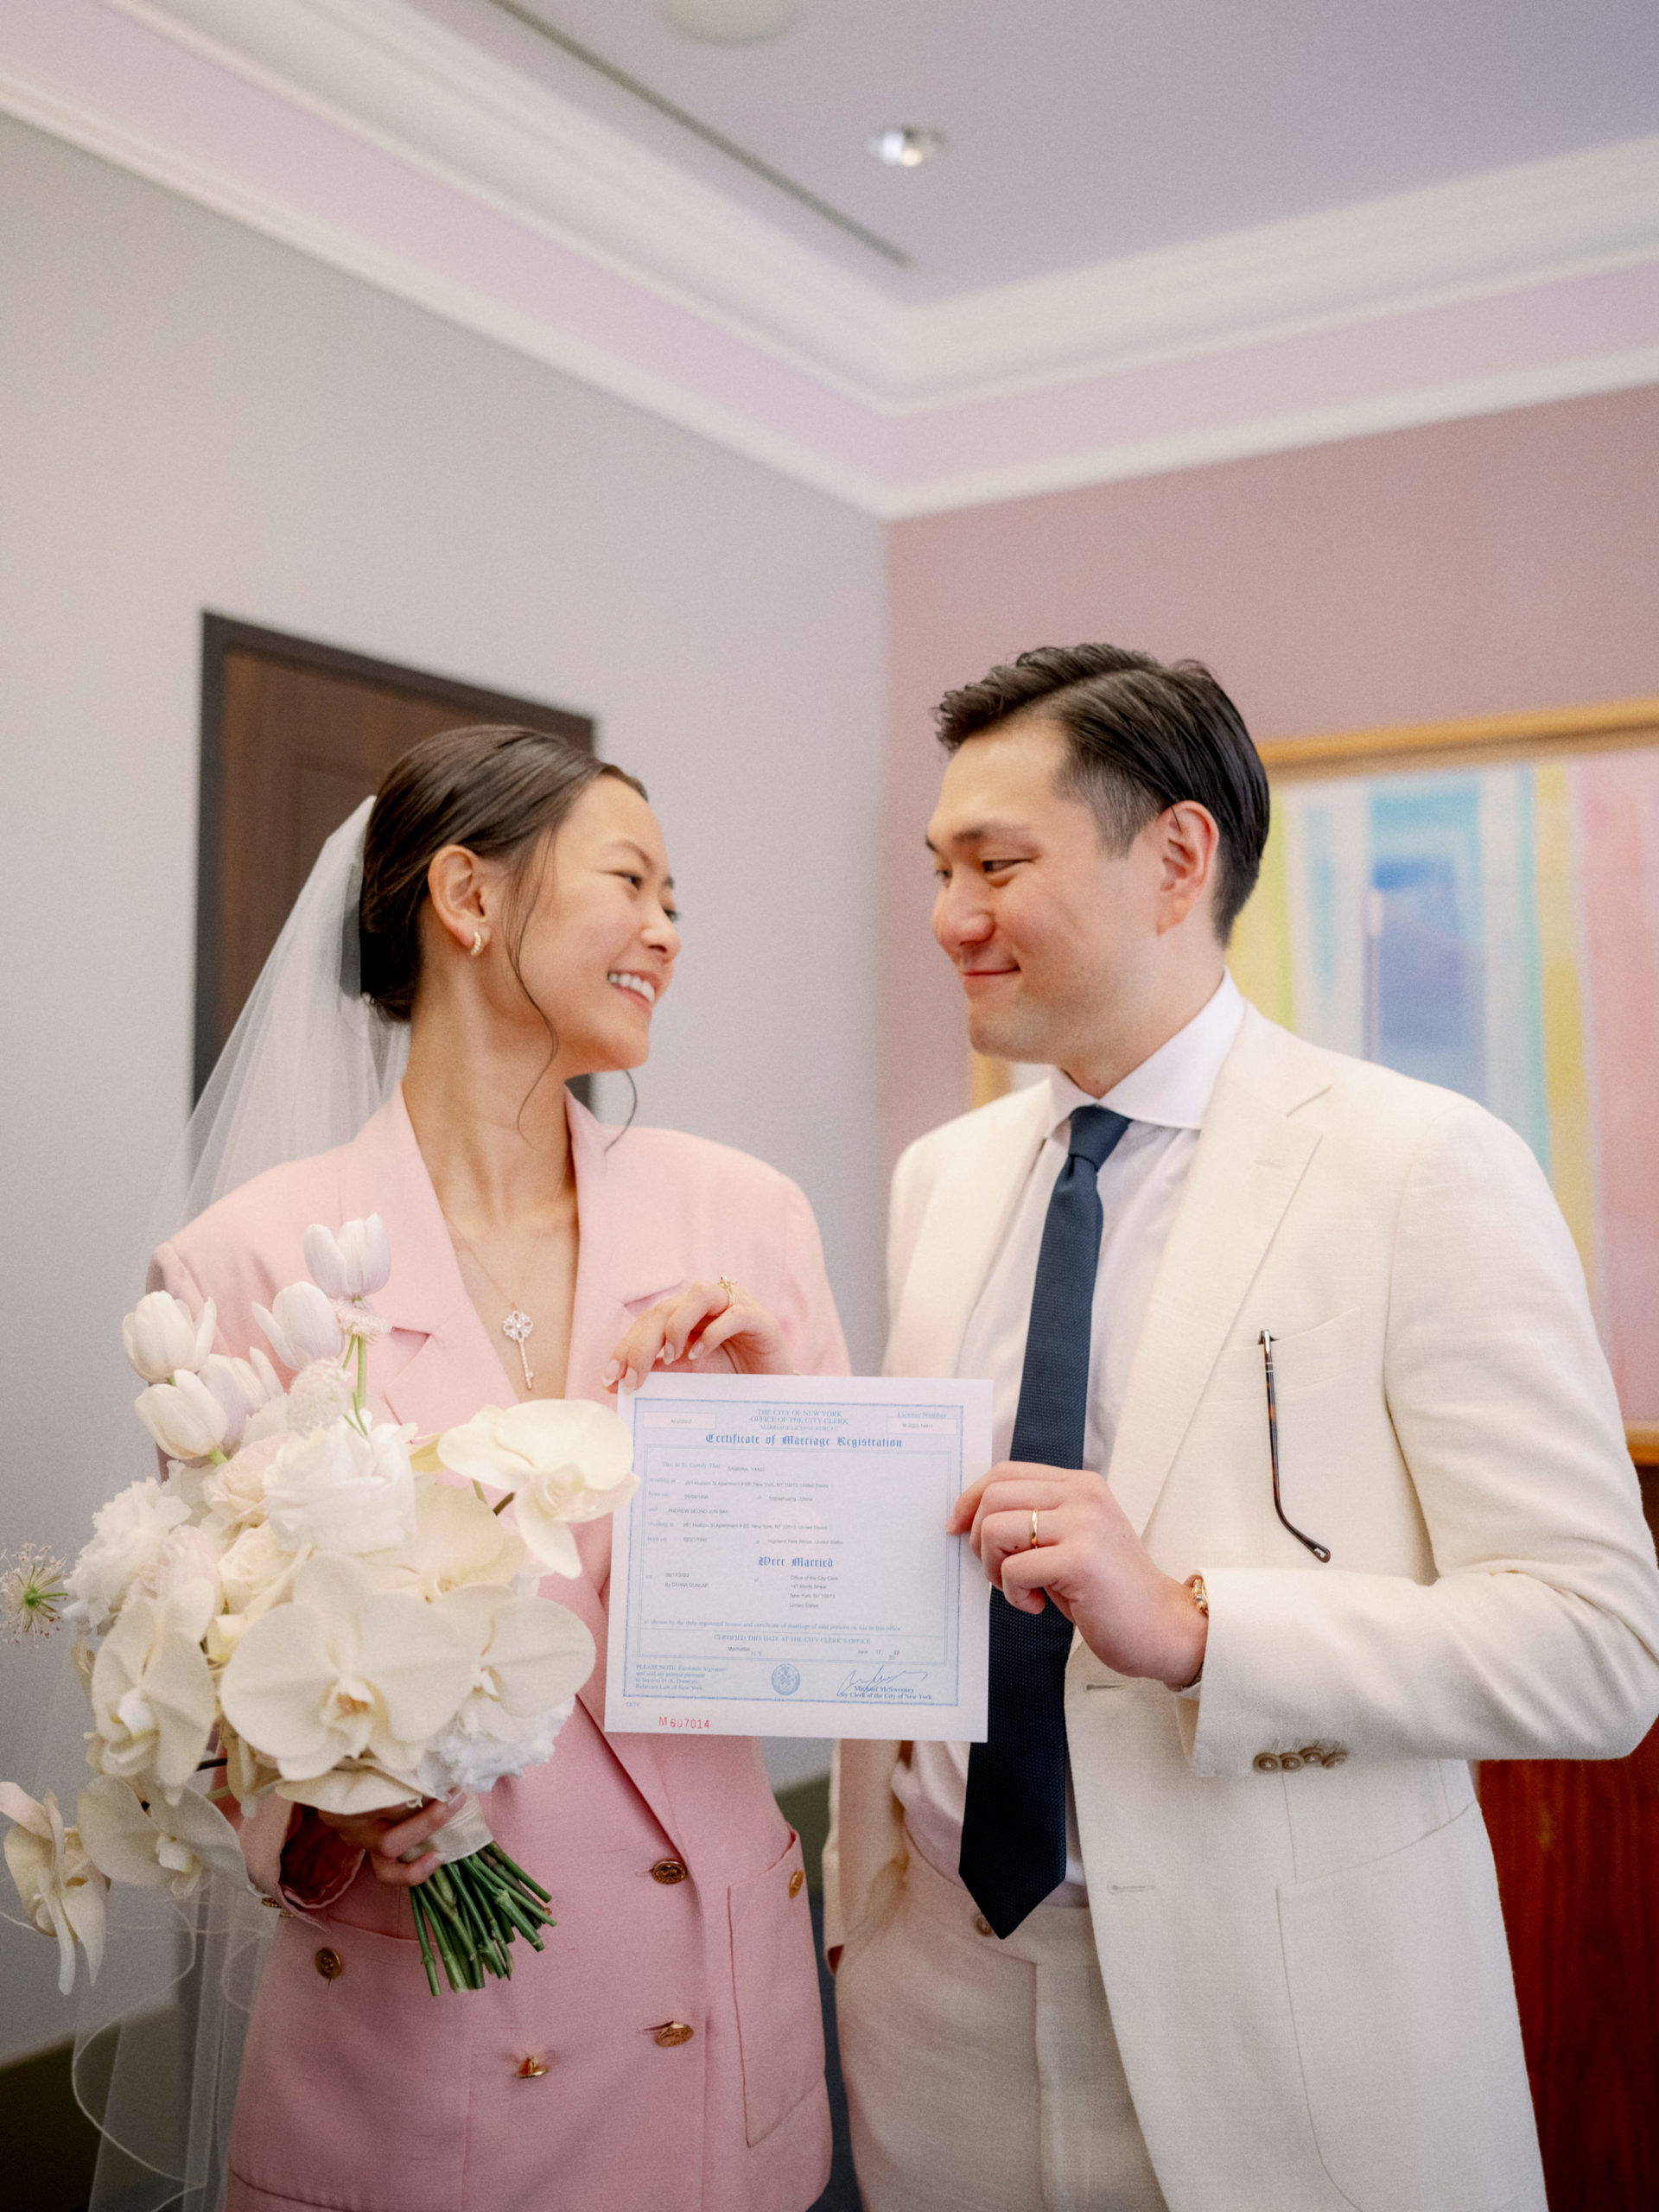 The bride and groom are holding their marriage certificate after the wedding ceremony at NYC City Hall. Editorial elopement image by Jenny Fu Studio.